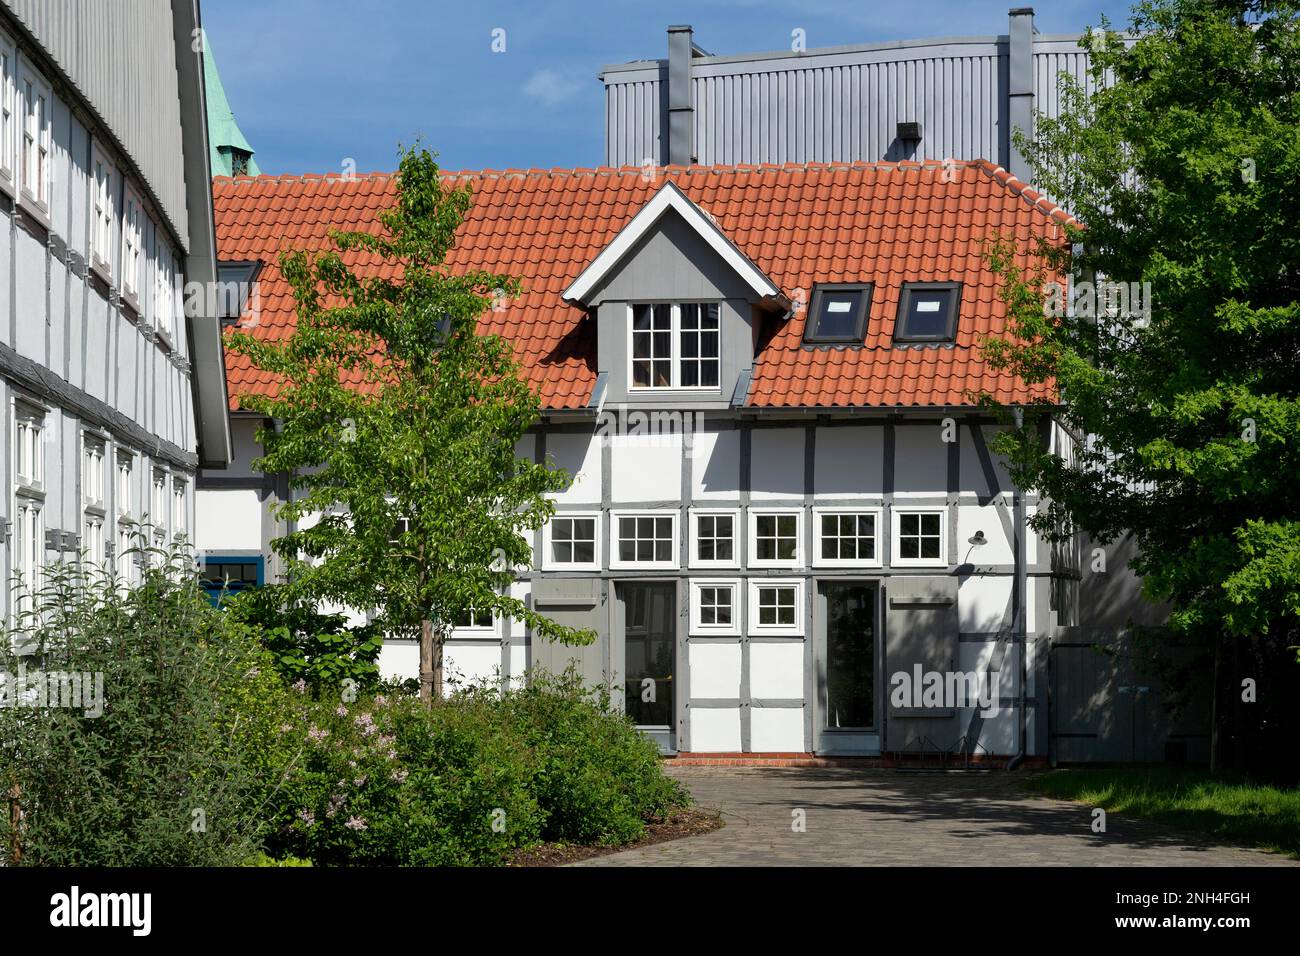 Frommenhof, former farmstead, now a municipal library, bookshop and restaurant, Dissen am Teutoburger Wald, Lower Saxony, Germany Stock Photo